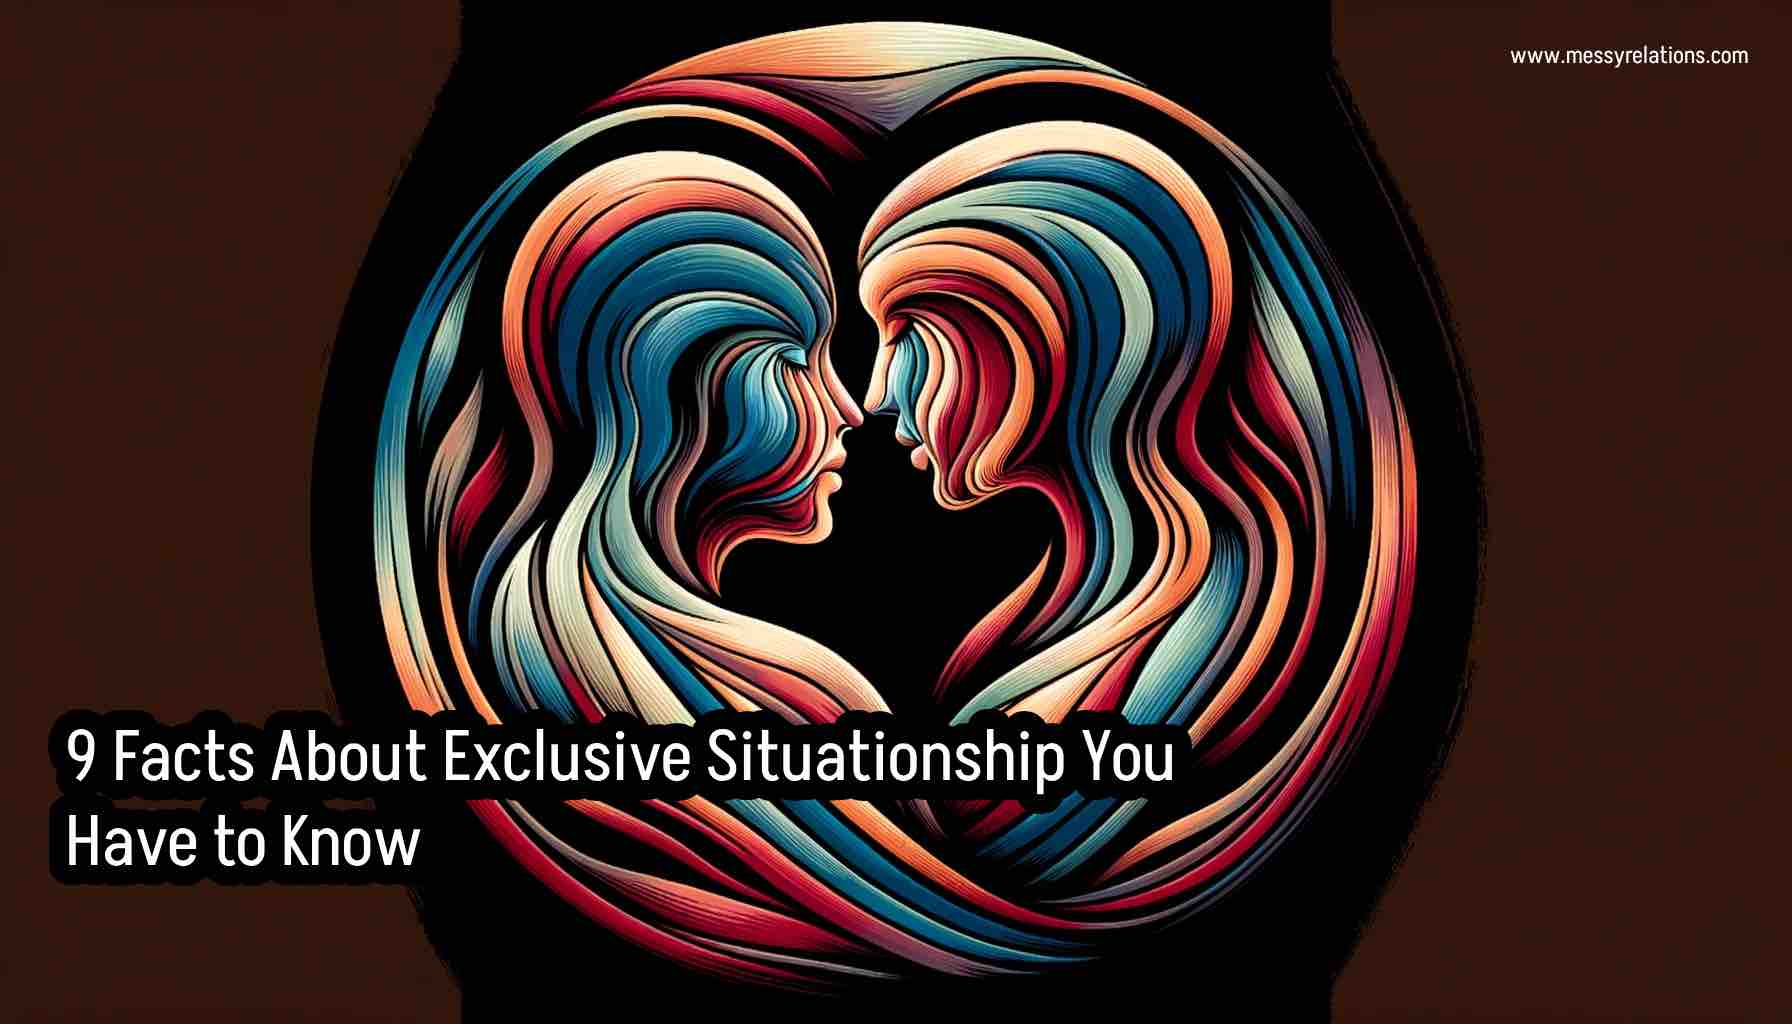 Exclusive Situationship